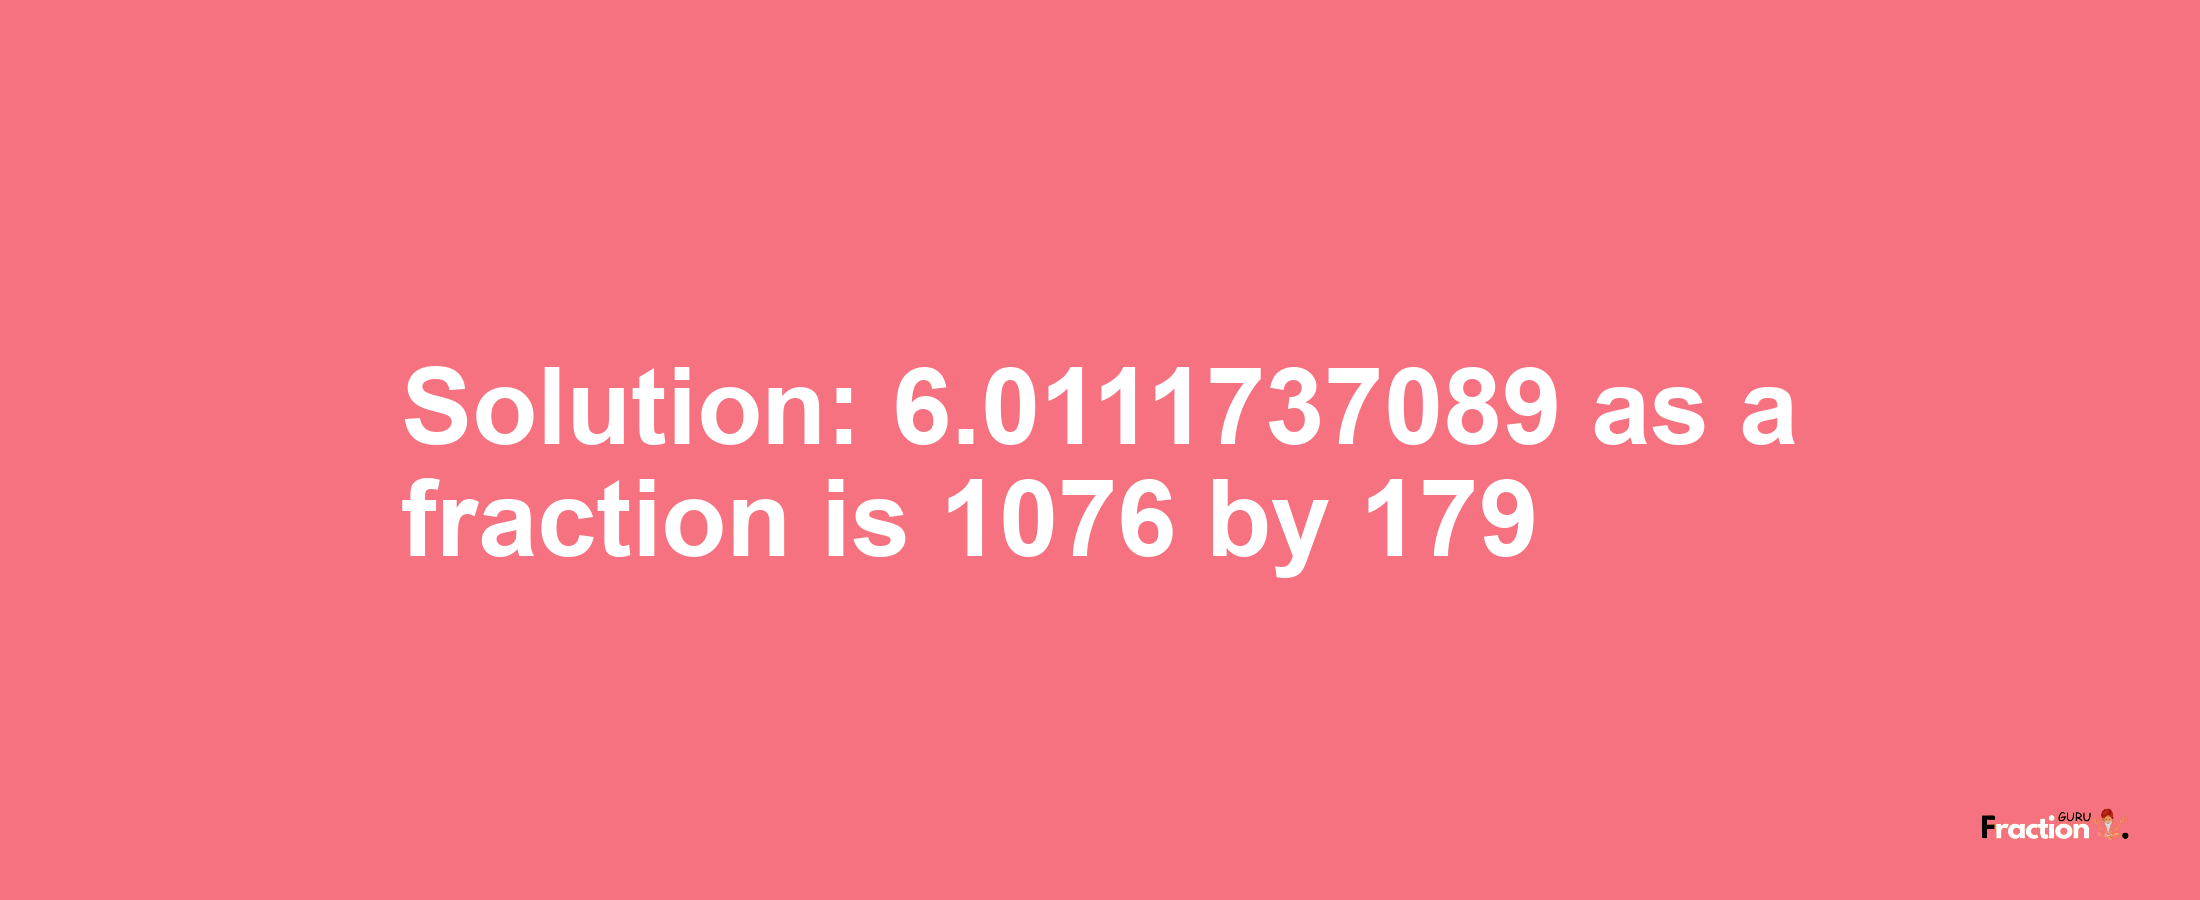 Solution:6.0111737089 as a fraction is 1076/179